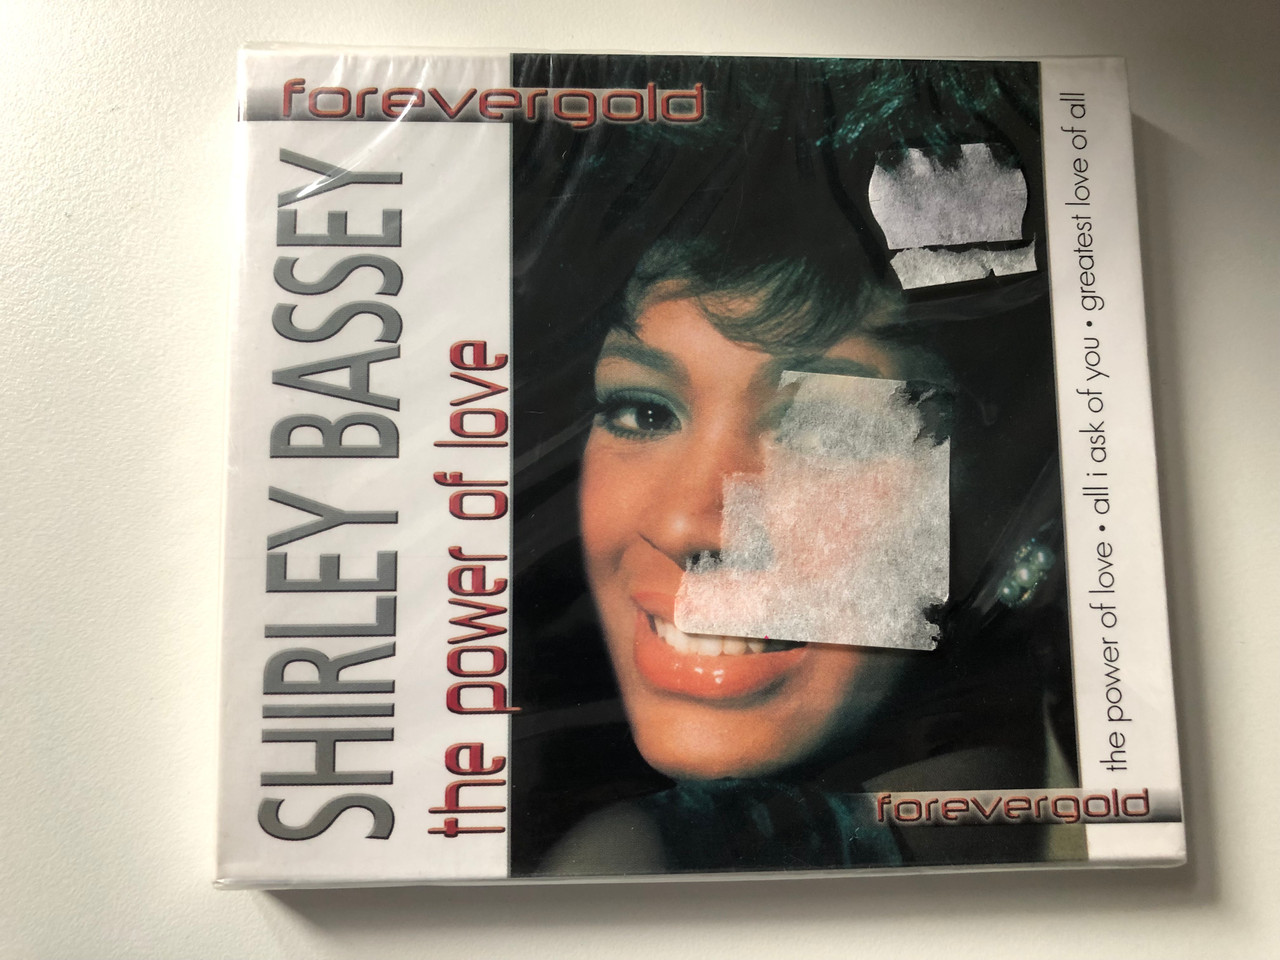 tent hoog dichtheid Shirley Bassey – The Power Of Love / Forever Gold / The Power Of Love, All  I Ask Of You, Greatest Love Of All / LMM Audio CD 2005 / 2701182 -  bibleinmylanguage